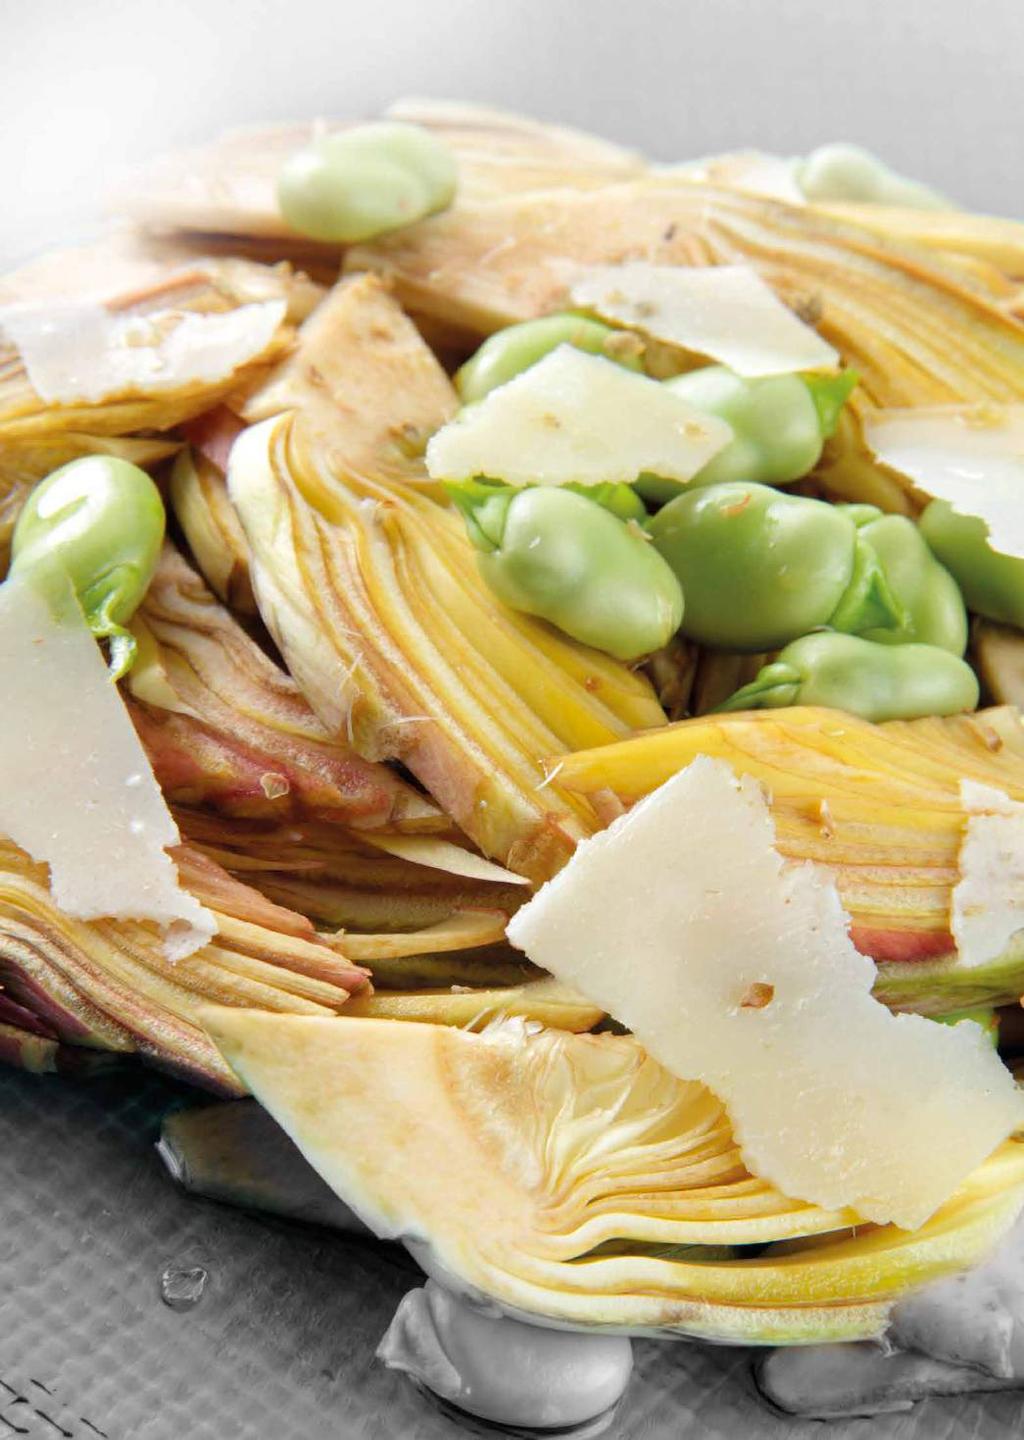 124 Artichokes au Naturel Artichokes au Naturel 125 These good-quality artichokes are deprived of the external harder leaves and of the stem, then cut into slices and packed au naturel.